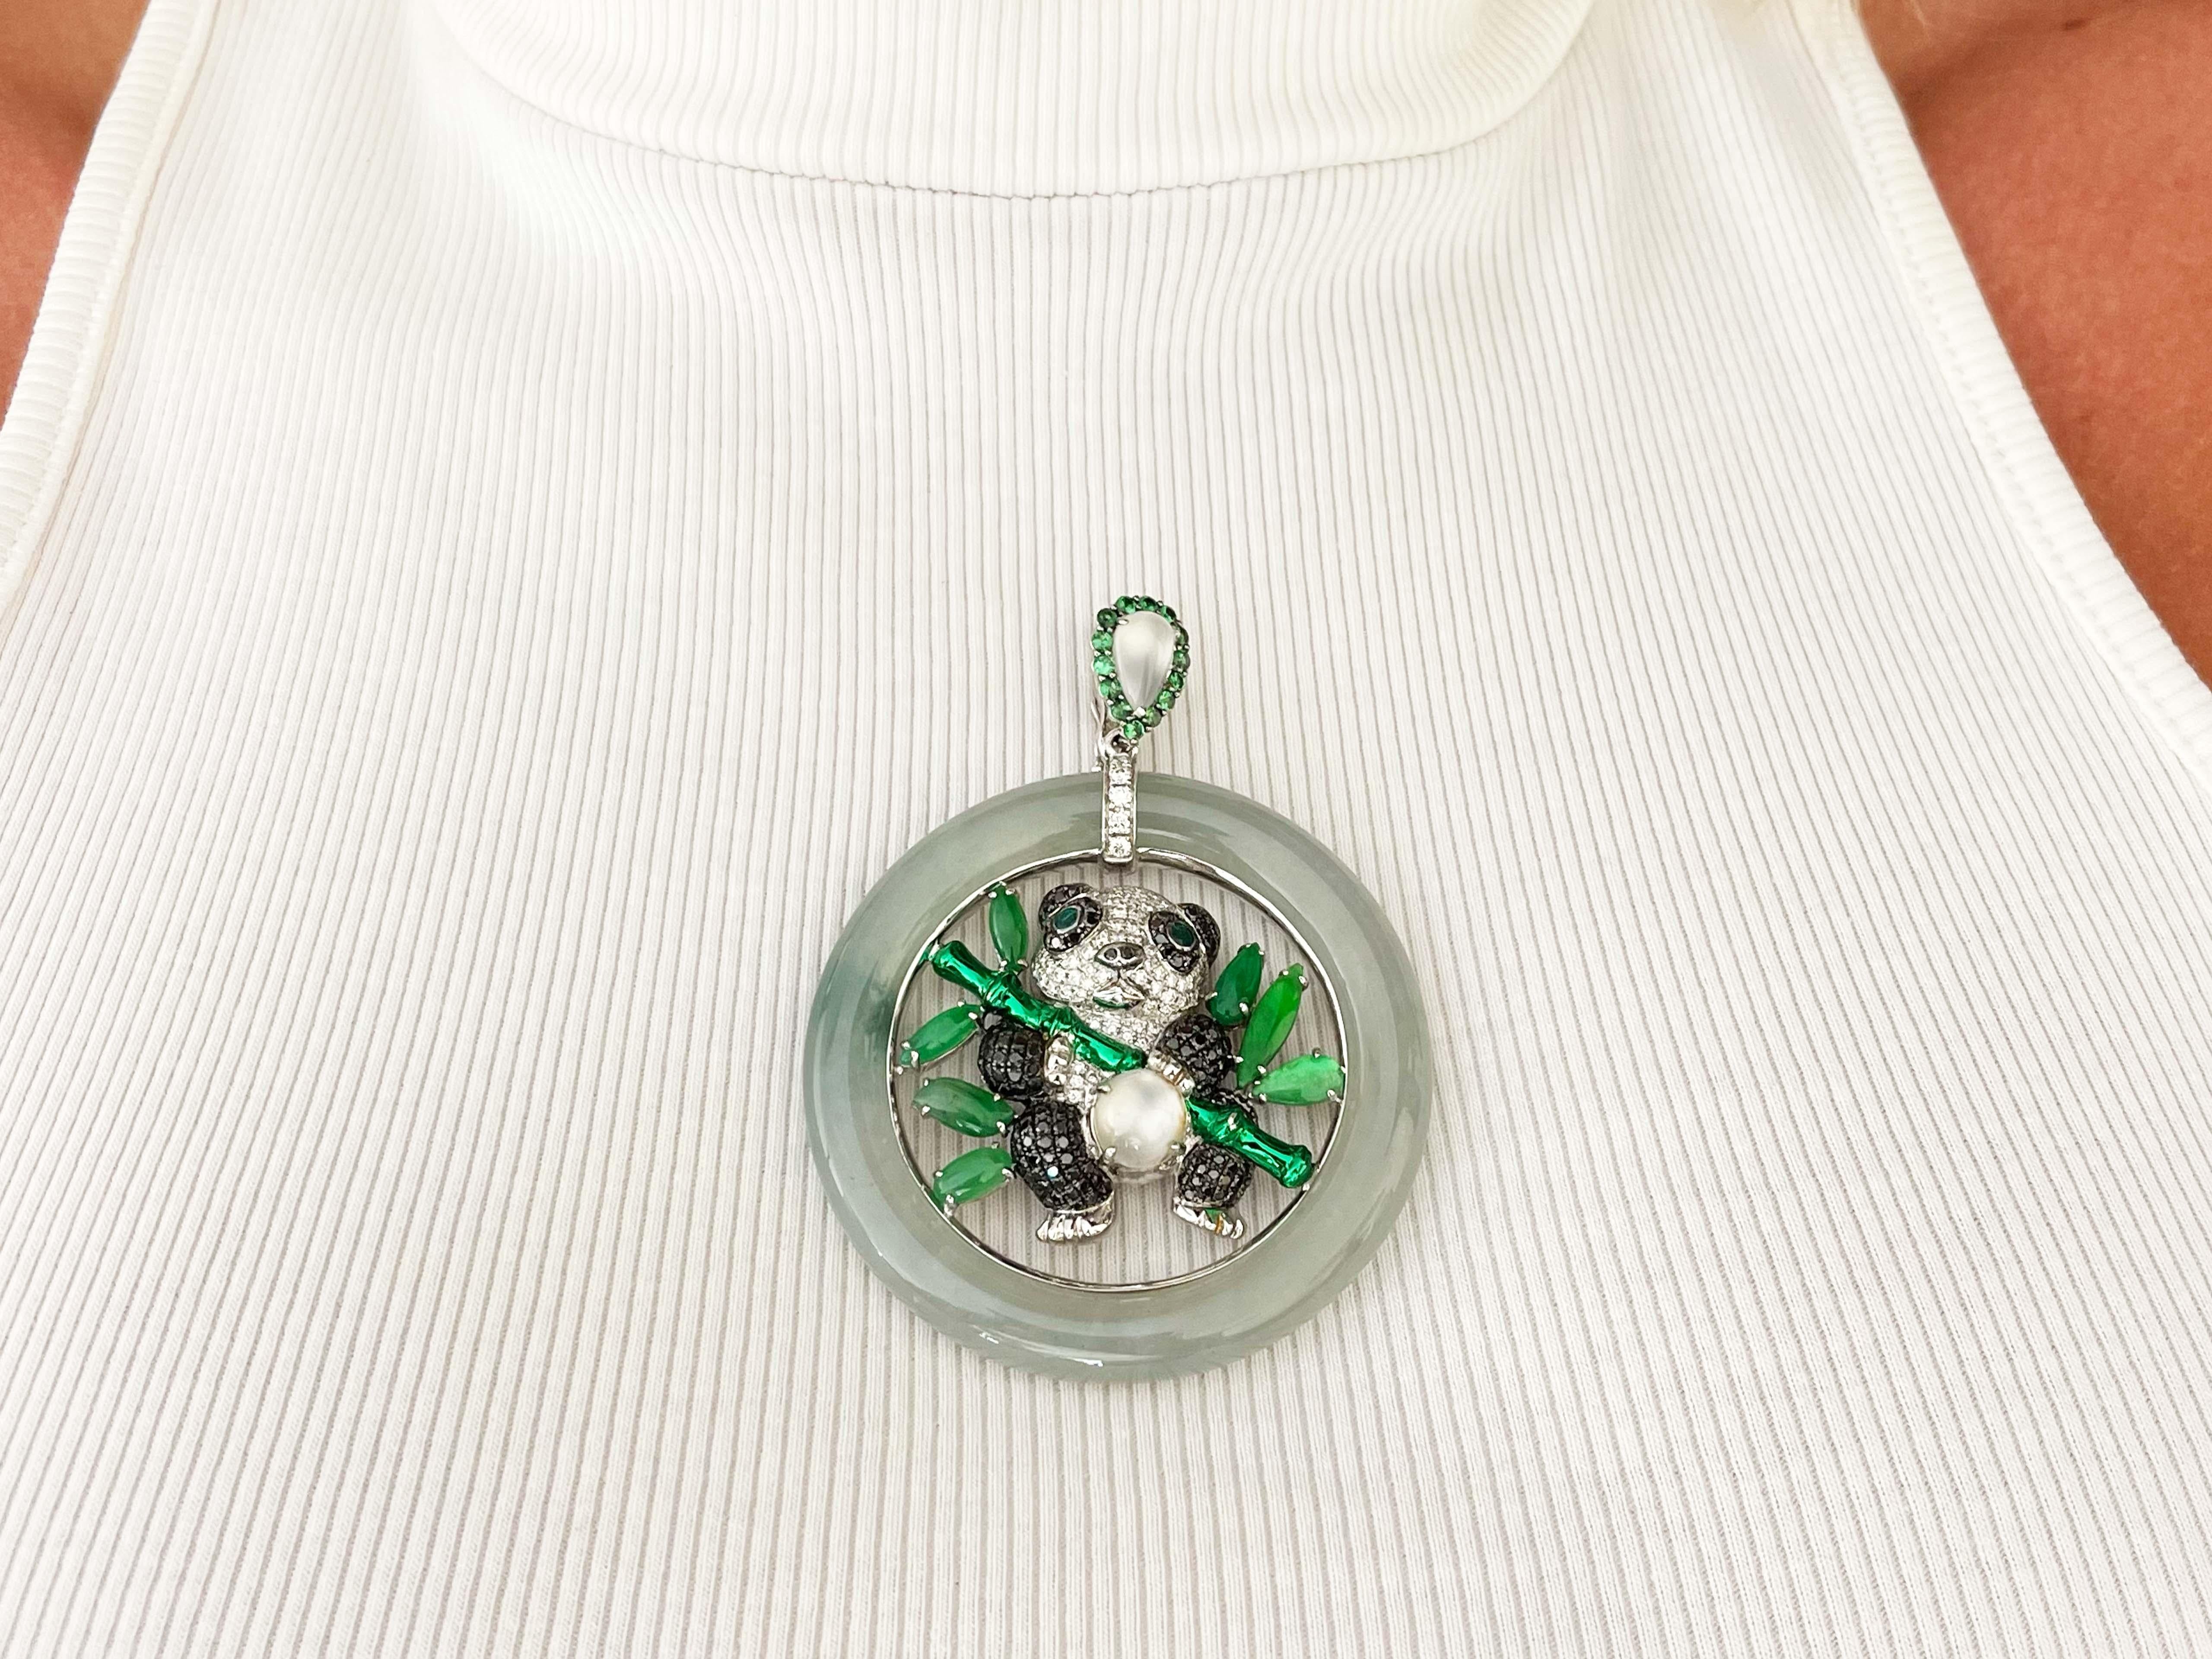 This unique one-of-a-kind pendant features 1.51 carats of black diamonds and 0.78 carats of white diamonds. There is a total of 24.70 carats of jade and the panda eyes are made with 0.15 carats of green emeralds. There are 2 moonstones totaling 2.5